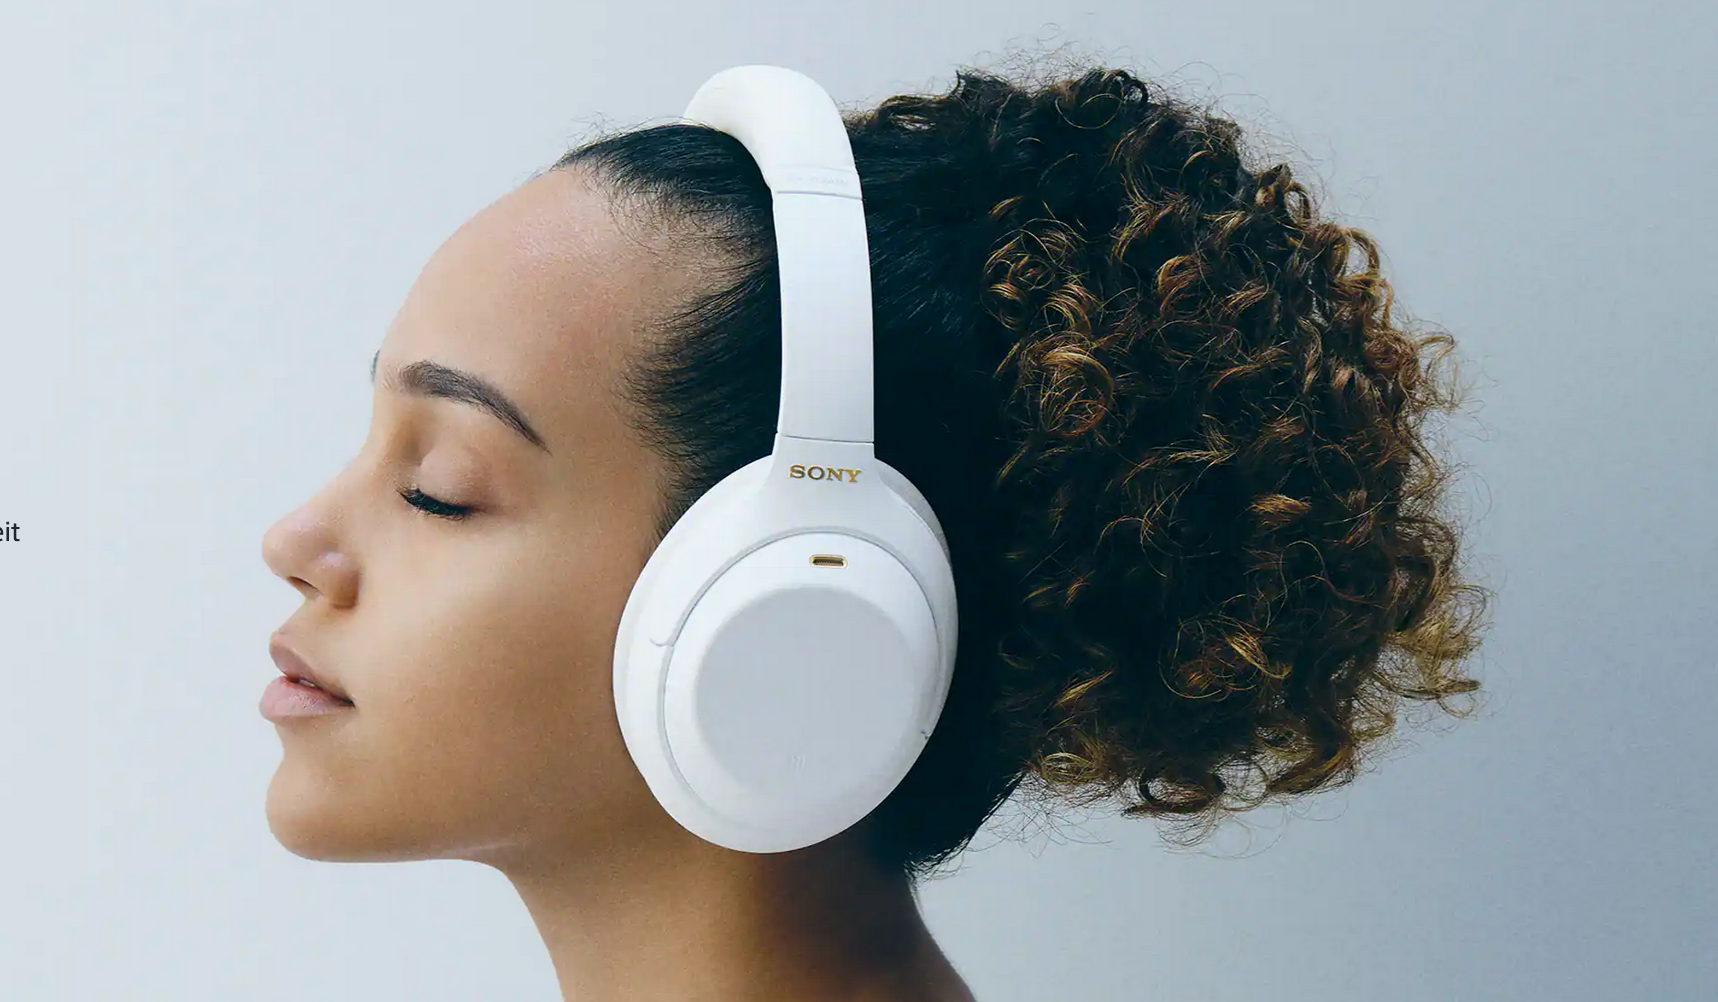 Sony kabellose Kopfhörer mit Noise Cancelling WH-1000XM4